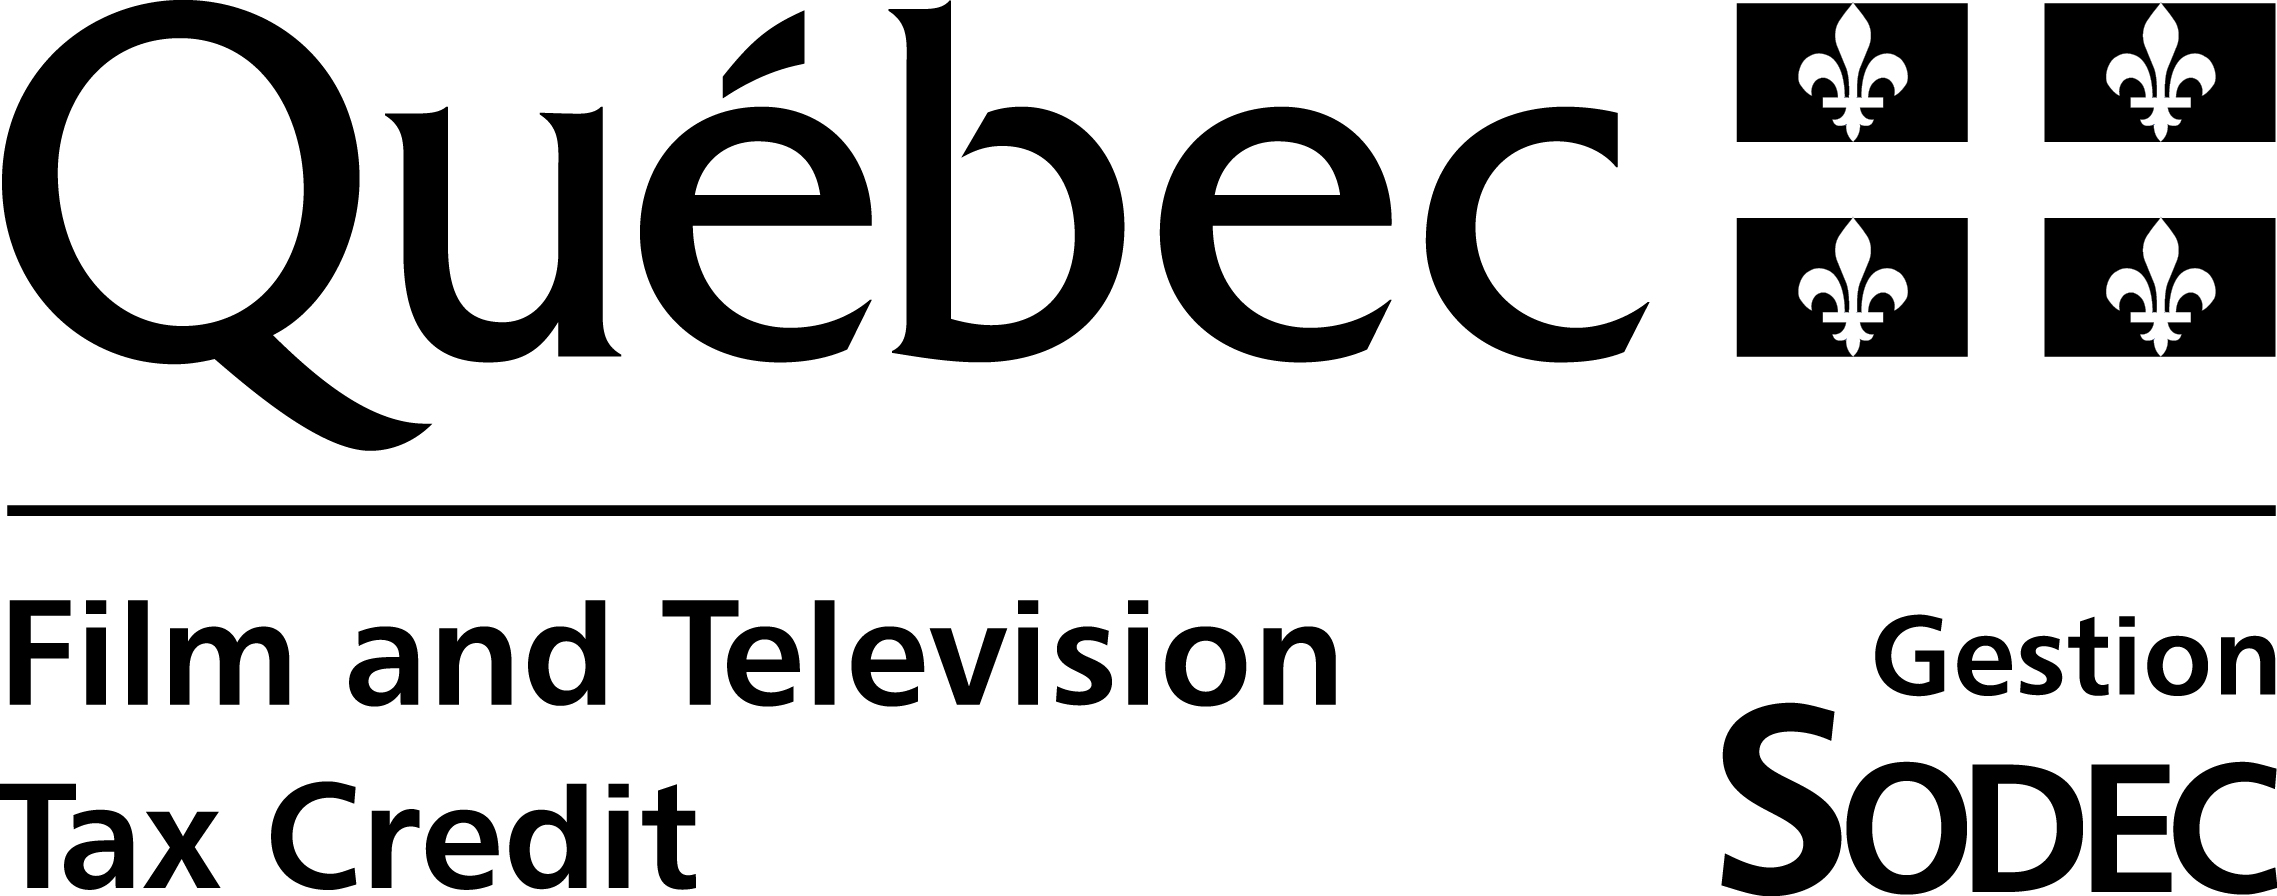 Québec Film and Television Tax Credit Blank Meme Template